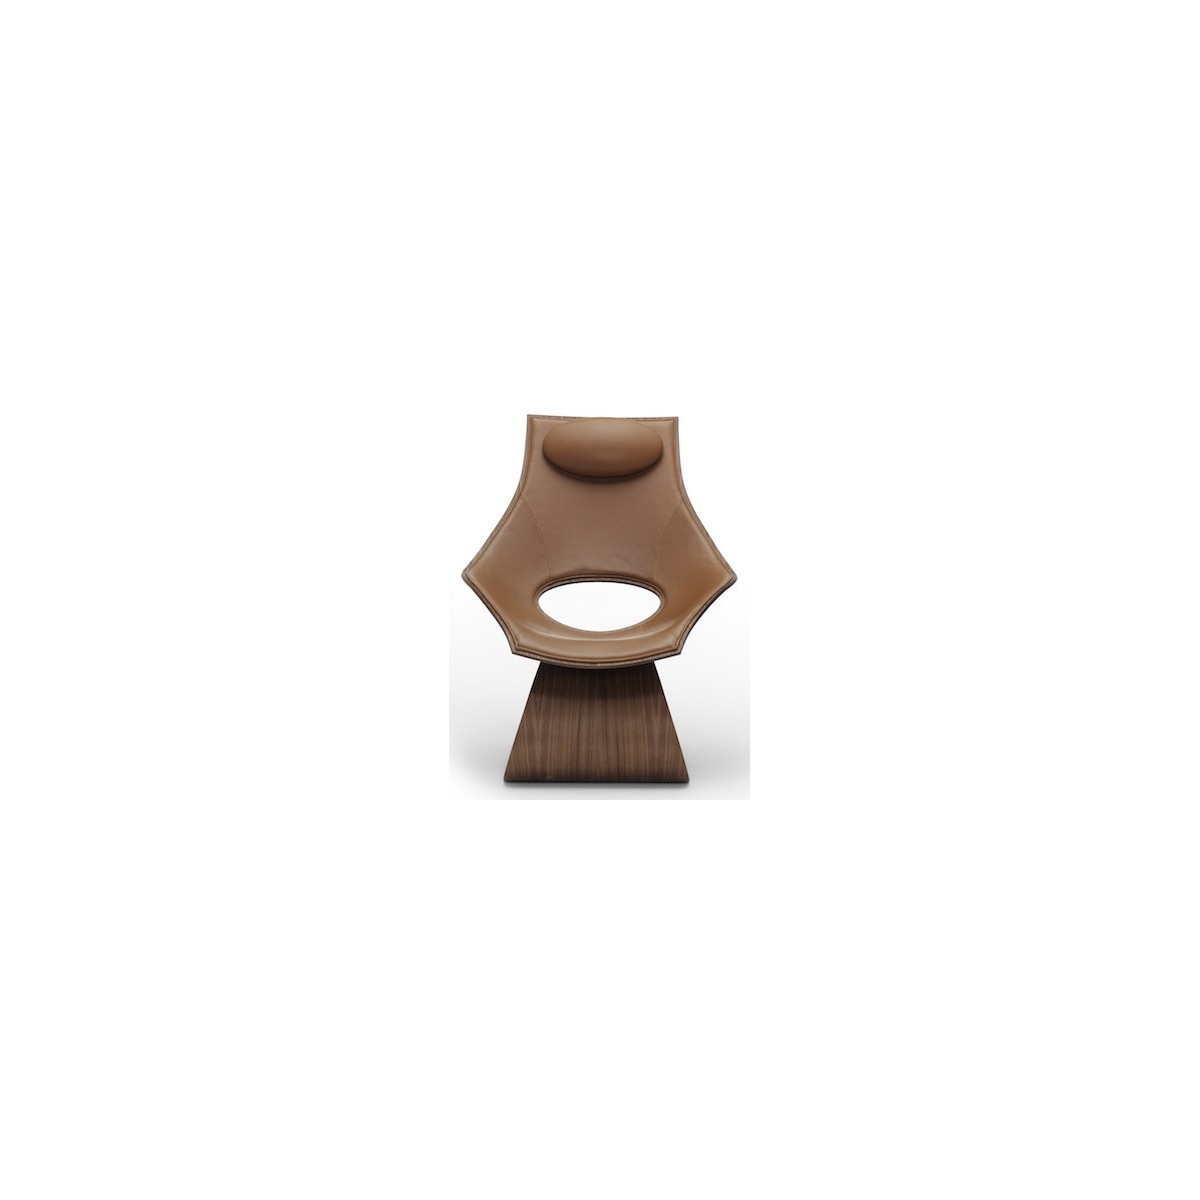 lacquered walnut + Thor 307 leather upholstery - Upholstered Dream chair